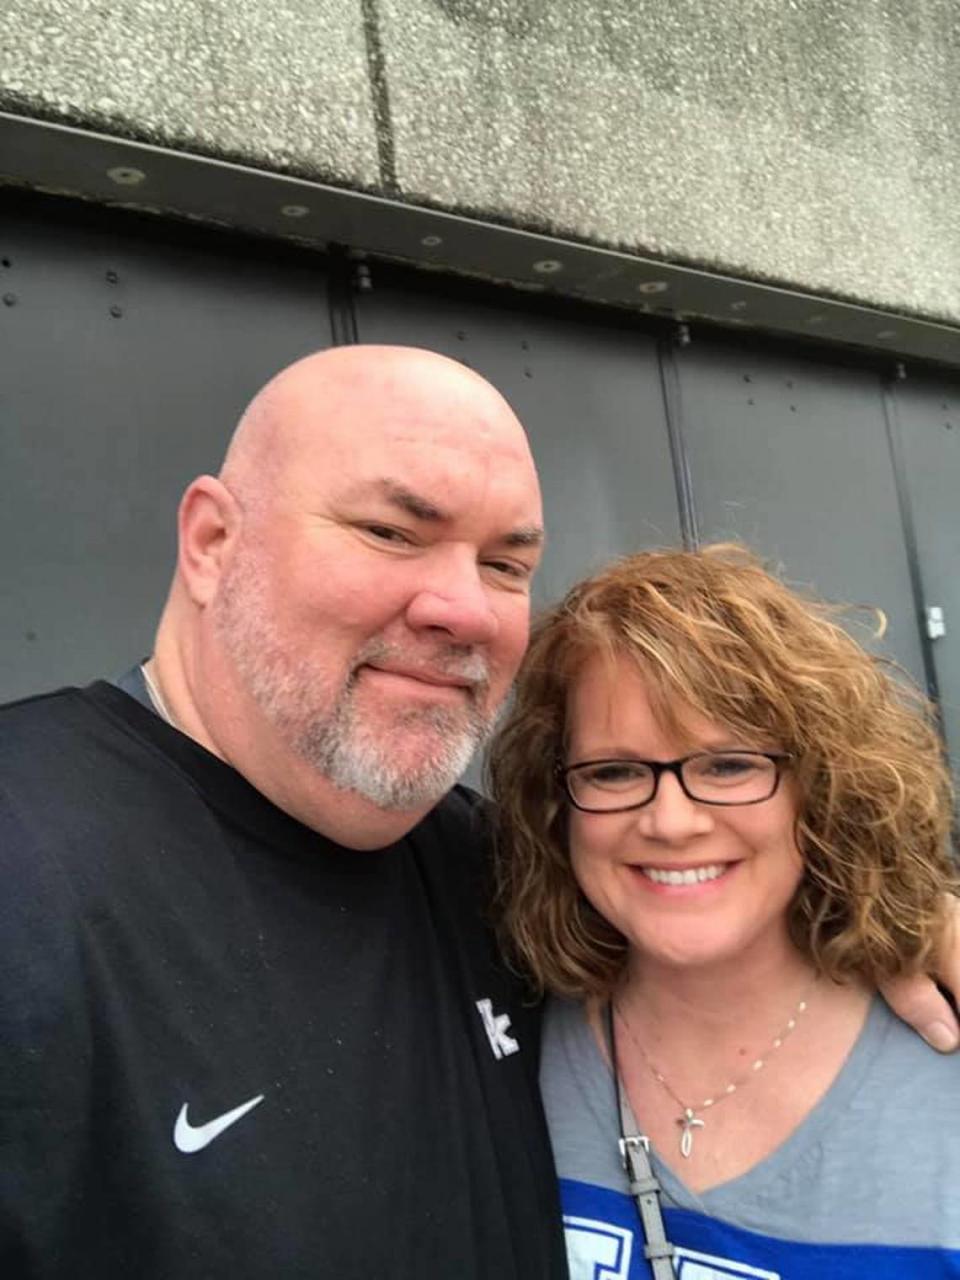 A photo of Marion County Coach Rob Reader and his wife, Joanna, was posted by Washington County Schools on Twitter in the announcement of his passing on Aug. 26, 2021.